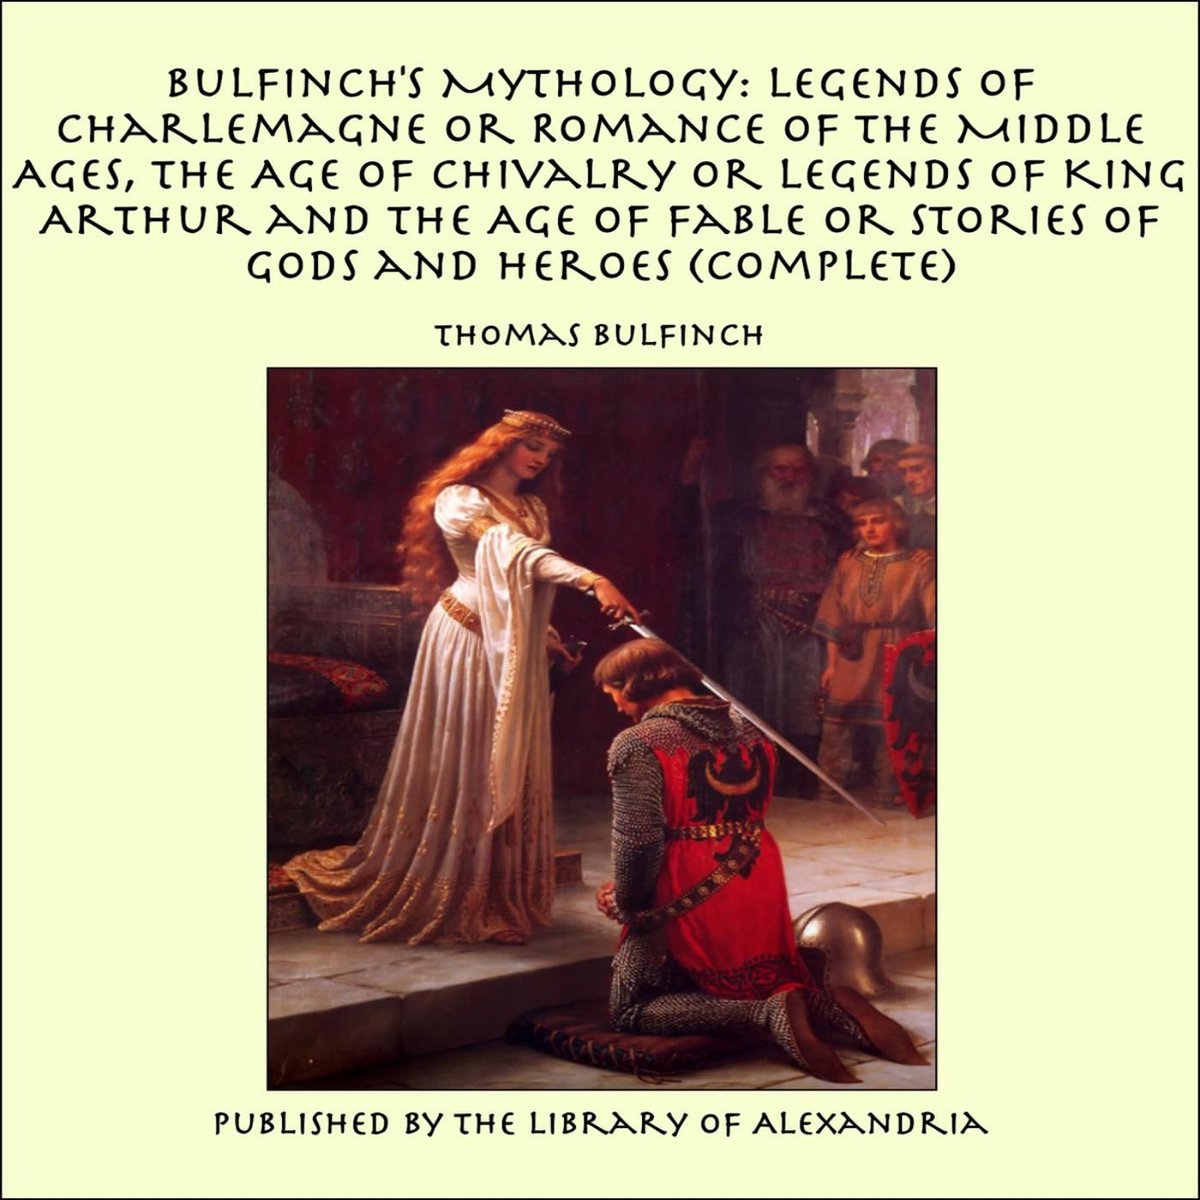 Bulfinch's Mythology: Legends of Charlemagne or Romance of the Middle Ages, The Age of Chivalry or Legends of King Arthur and The Age of Fable or Stories of Gods and Heroes (Complete) - Thomas Bulfinch